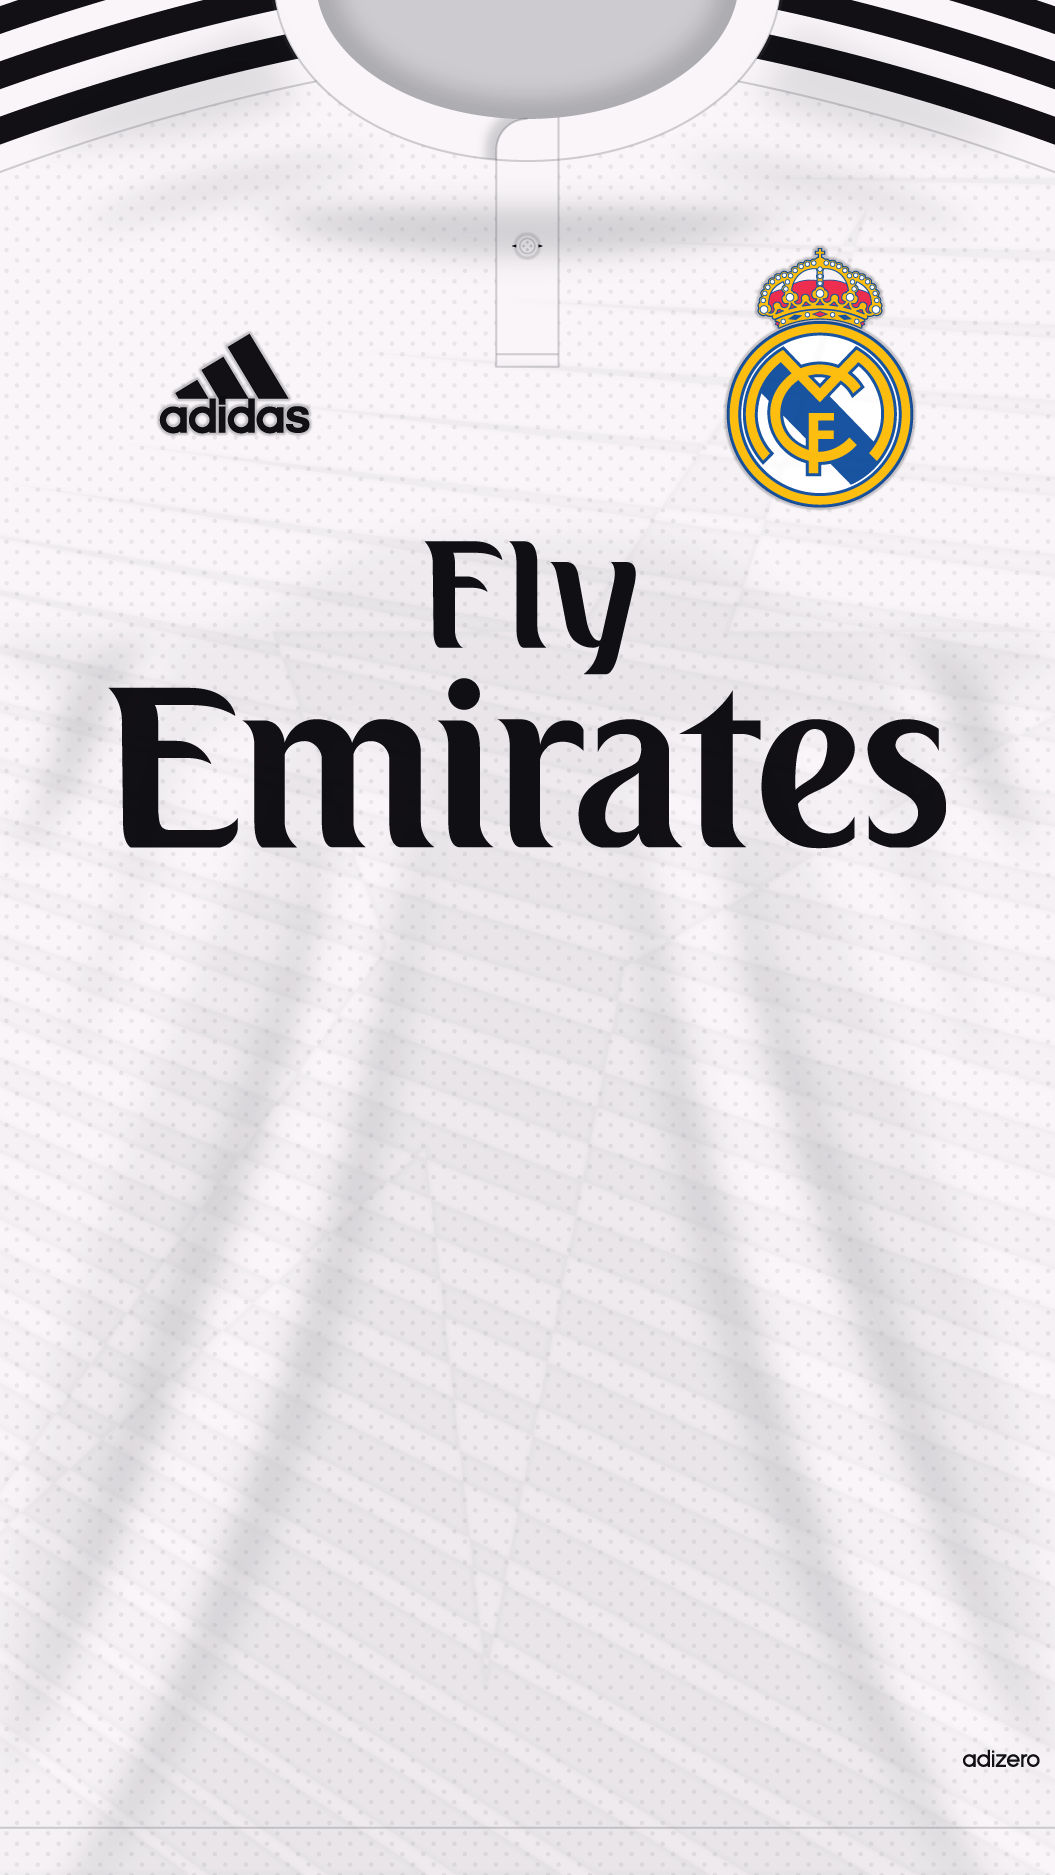 Real Madrid Iphone Wallpapers Top Free Real Madrid Iphone Backgrounds Wallpaperaccess